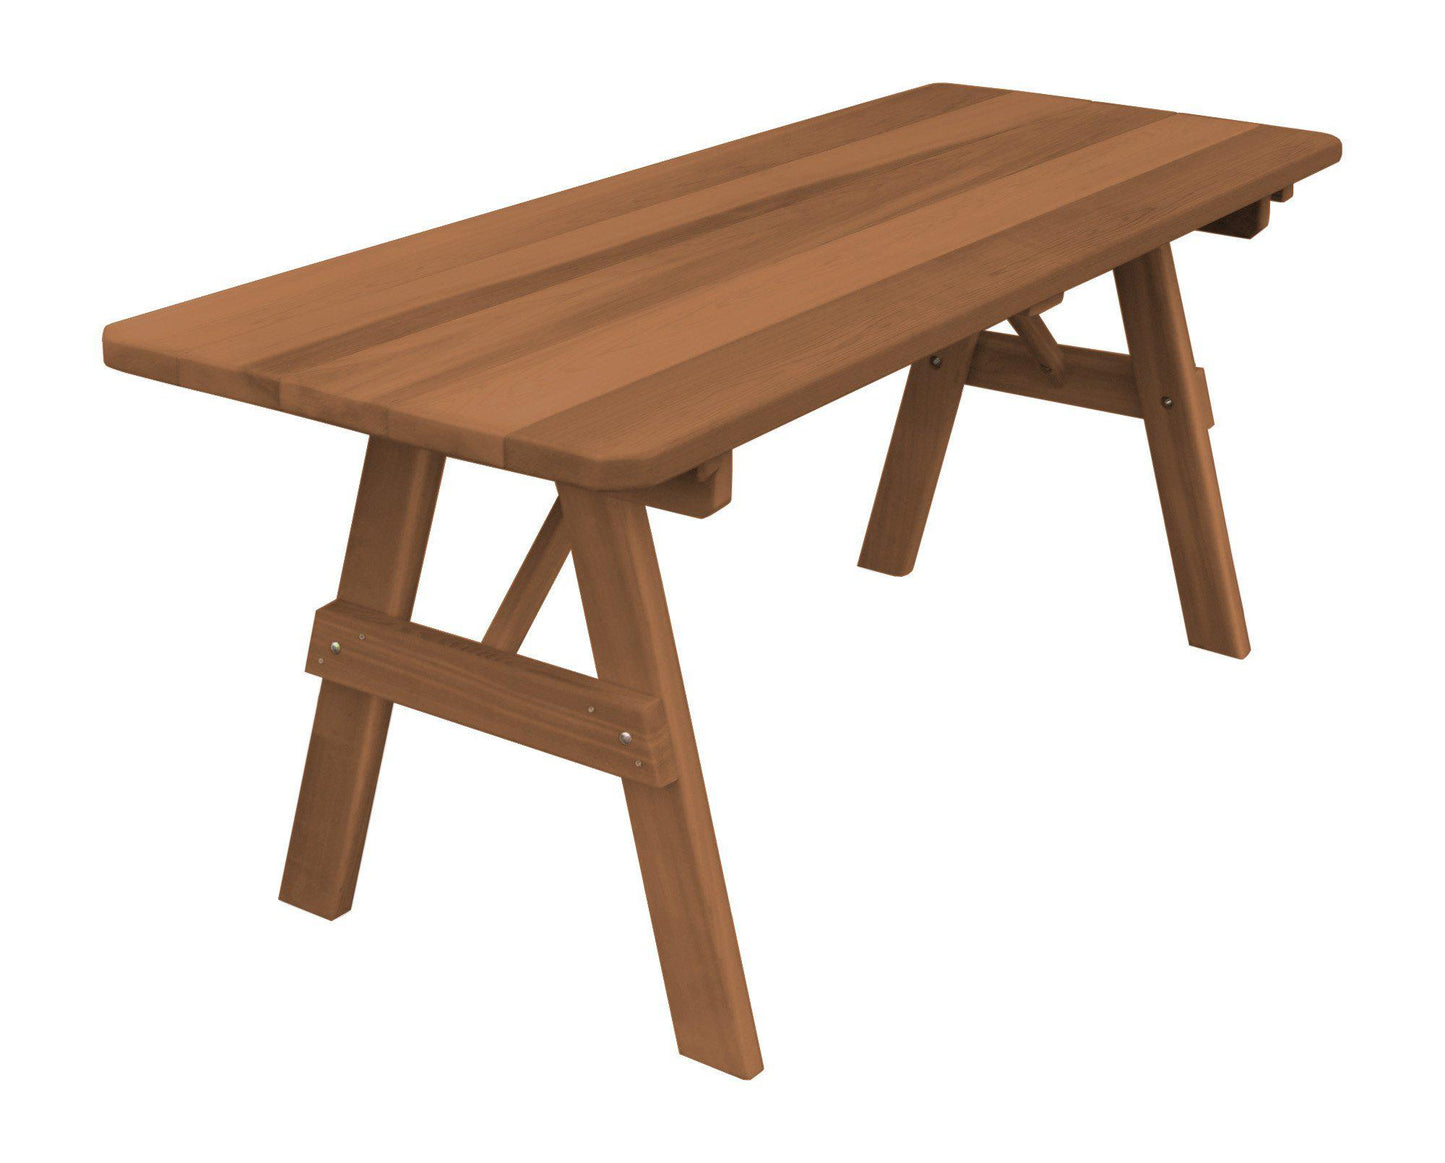 A&L FURNITURE CO.Western Red Cedar 44" Traditional Table Only - Specify for FREE 2" Umbrella Hole - LEAD TIME TO SHIP 4 WEEKS OR LESS